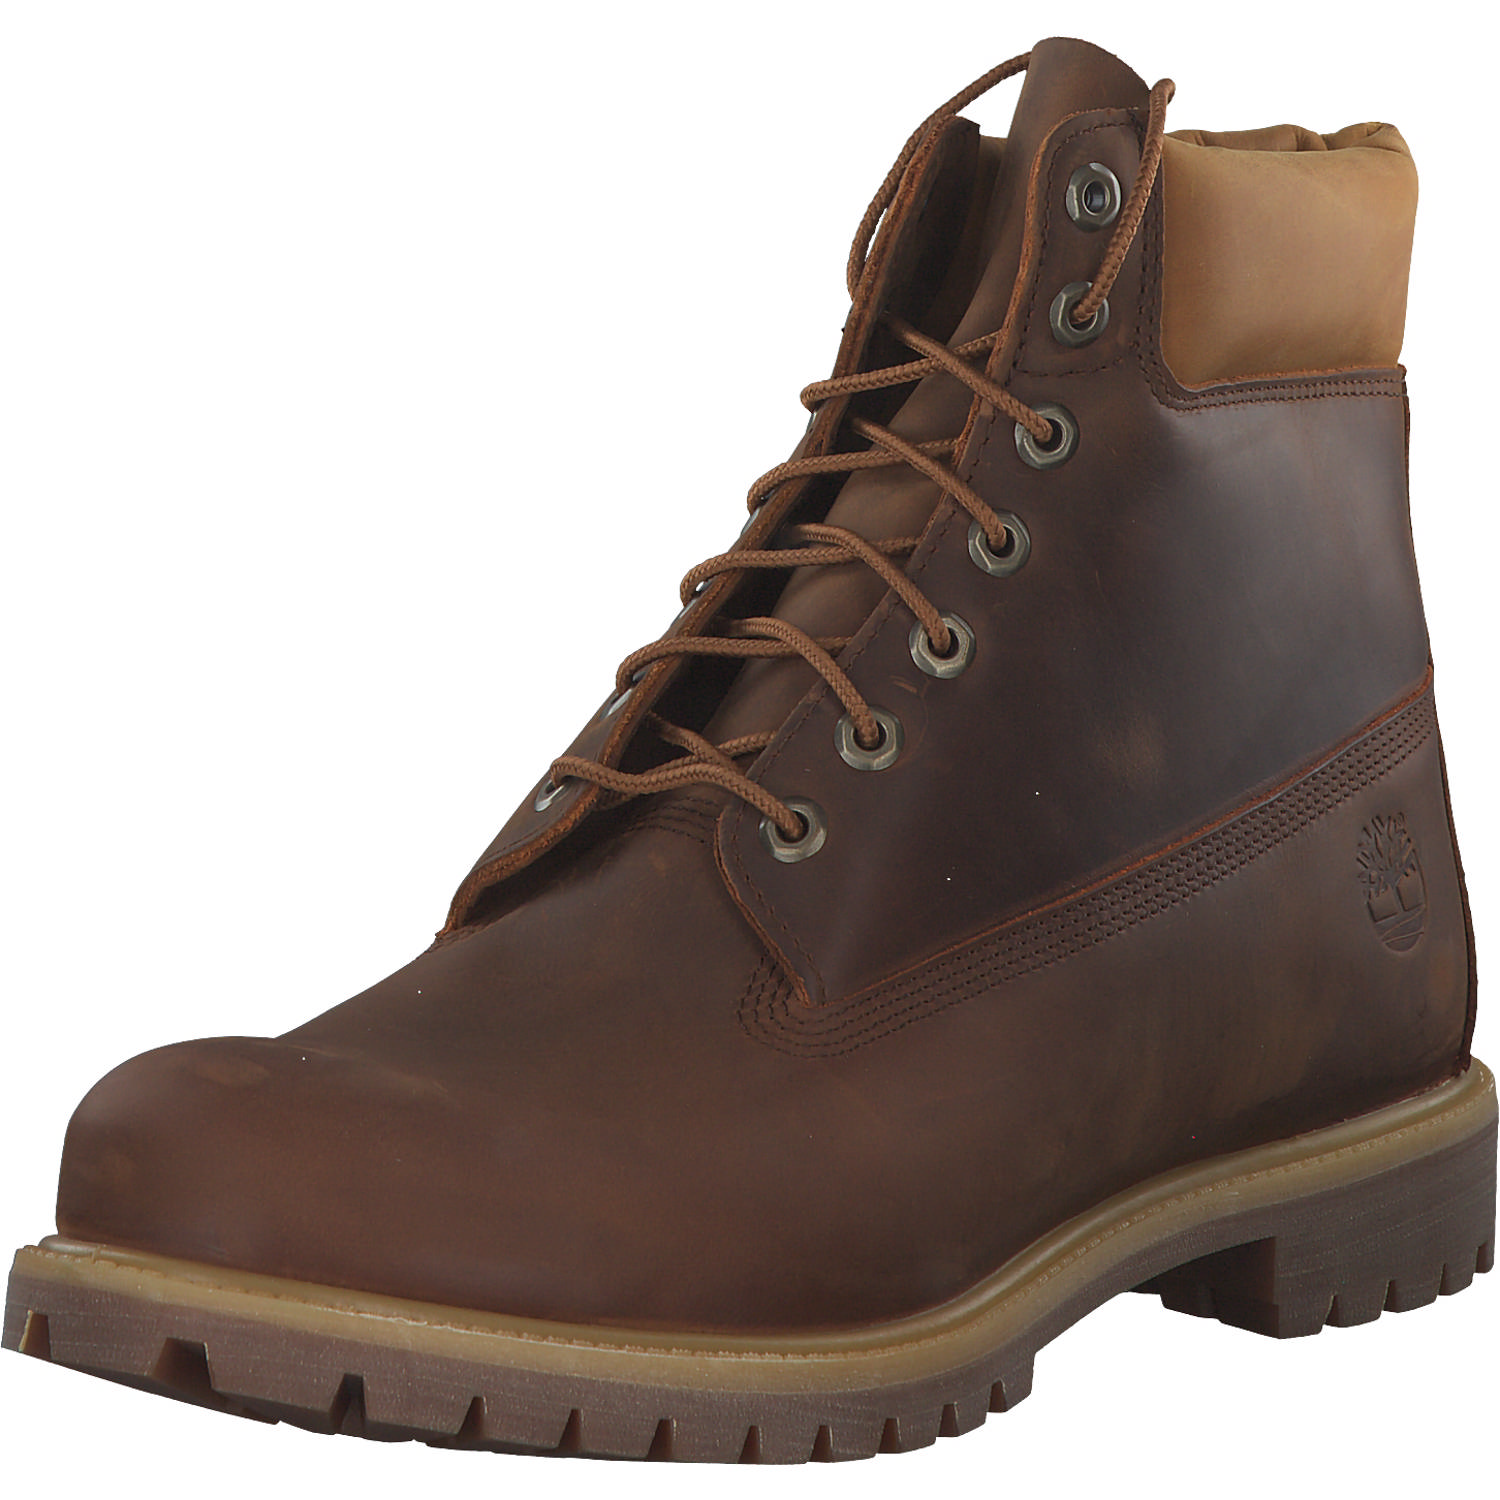 Сапоги Timberland Winter, цвет CATHAY SPICE кроссовки keen jasper cathay spice orion blue